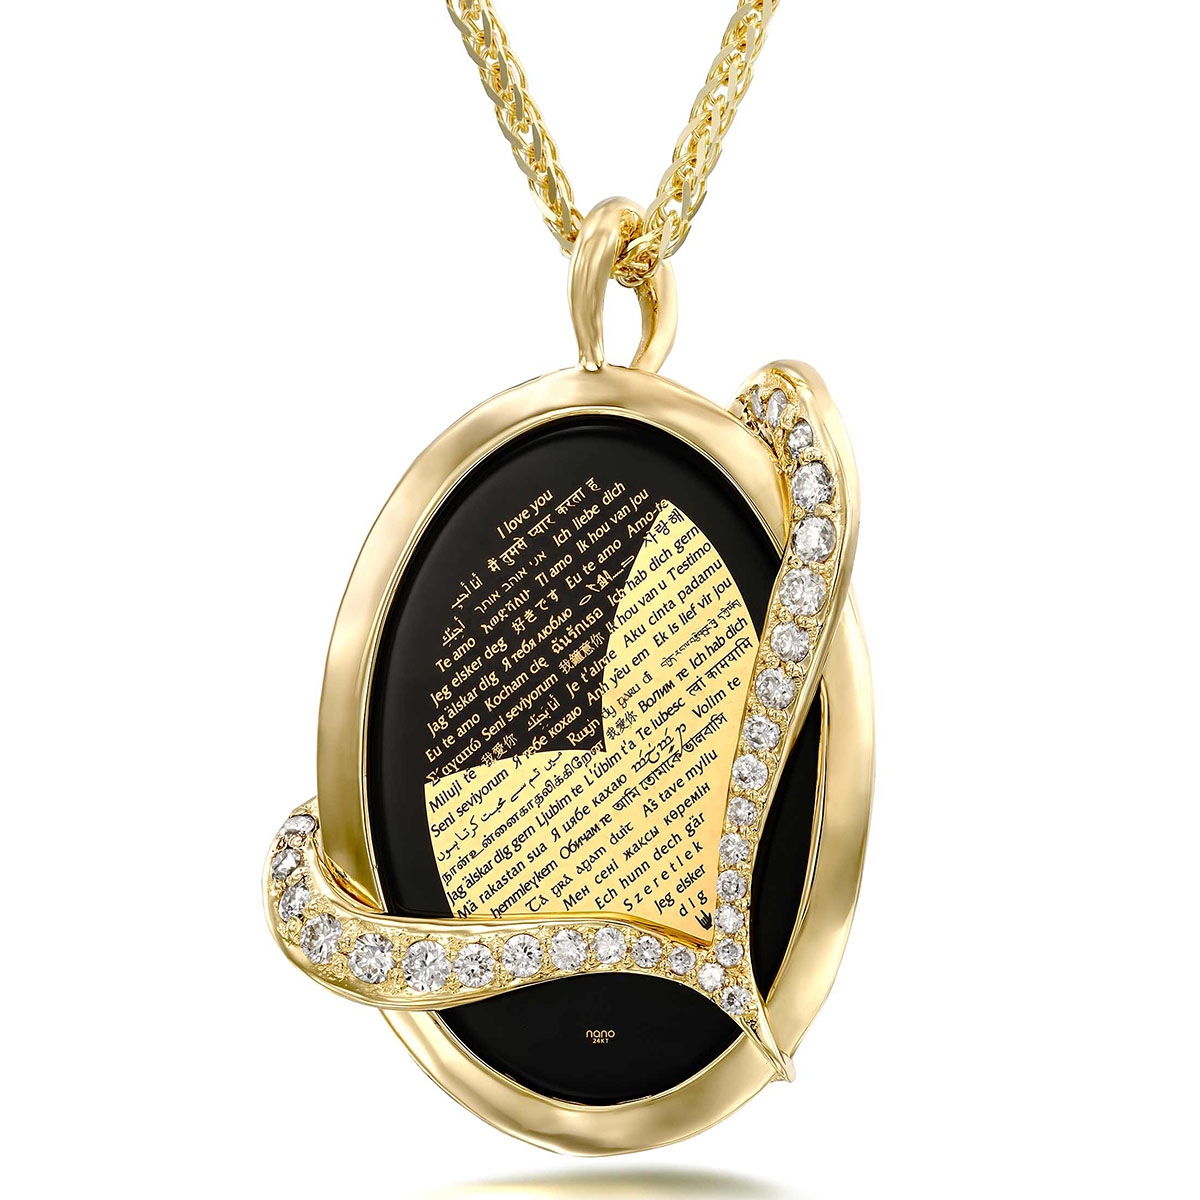 14K Gold and Onyx Necklace Micro-Inscribed in 24K Gold With "I Love You" in 60 Languages and With Diamond-Accented Heart - 1